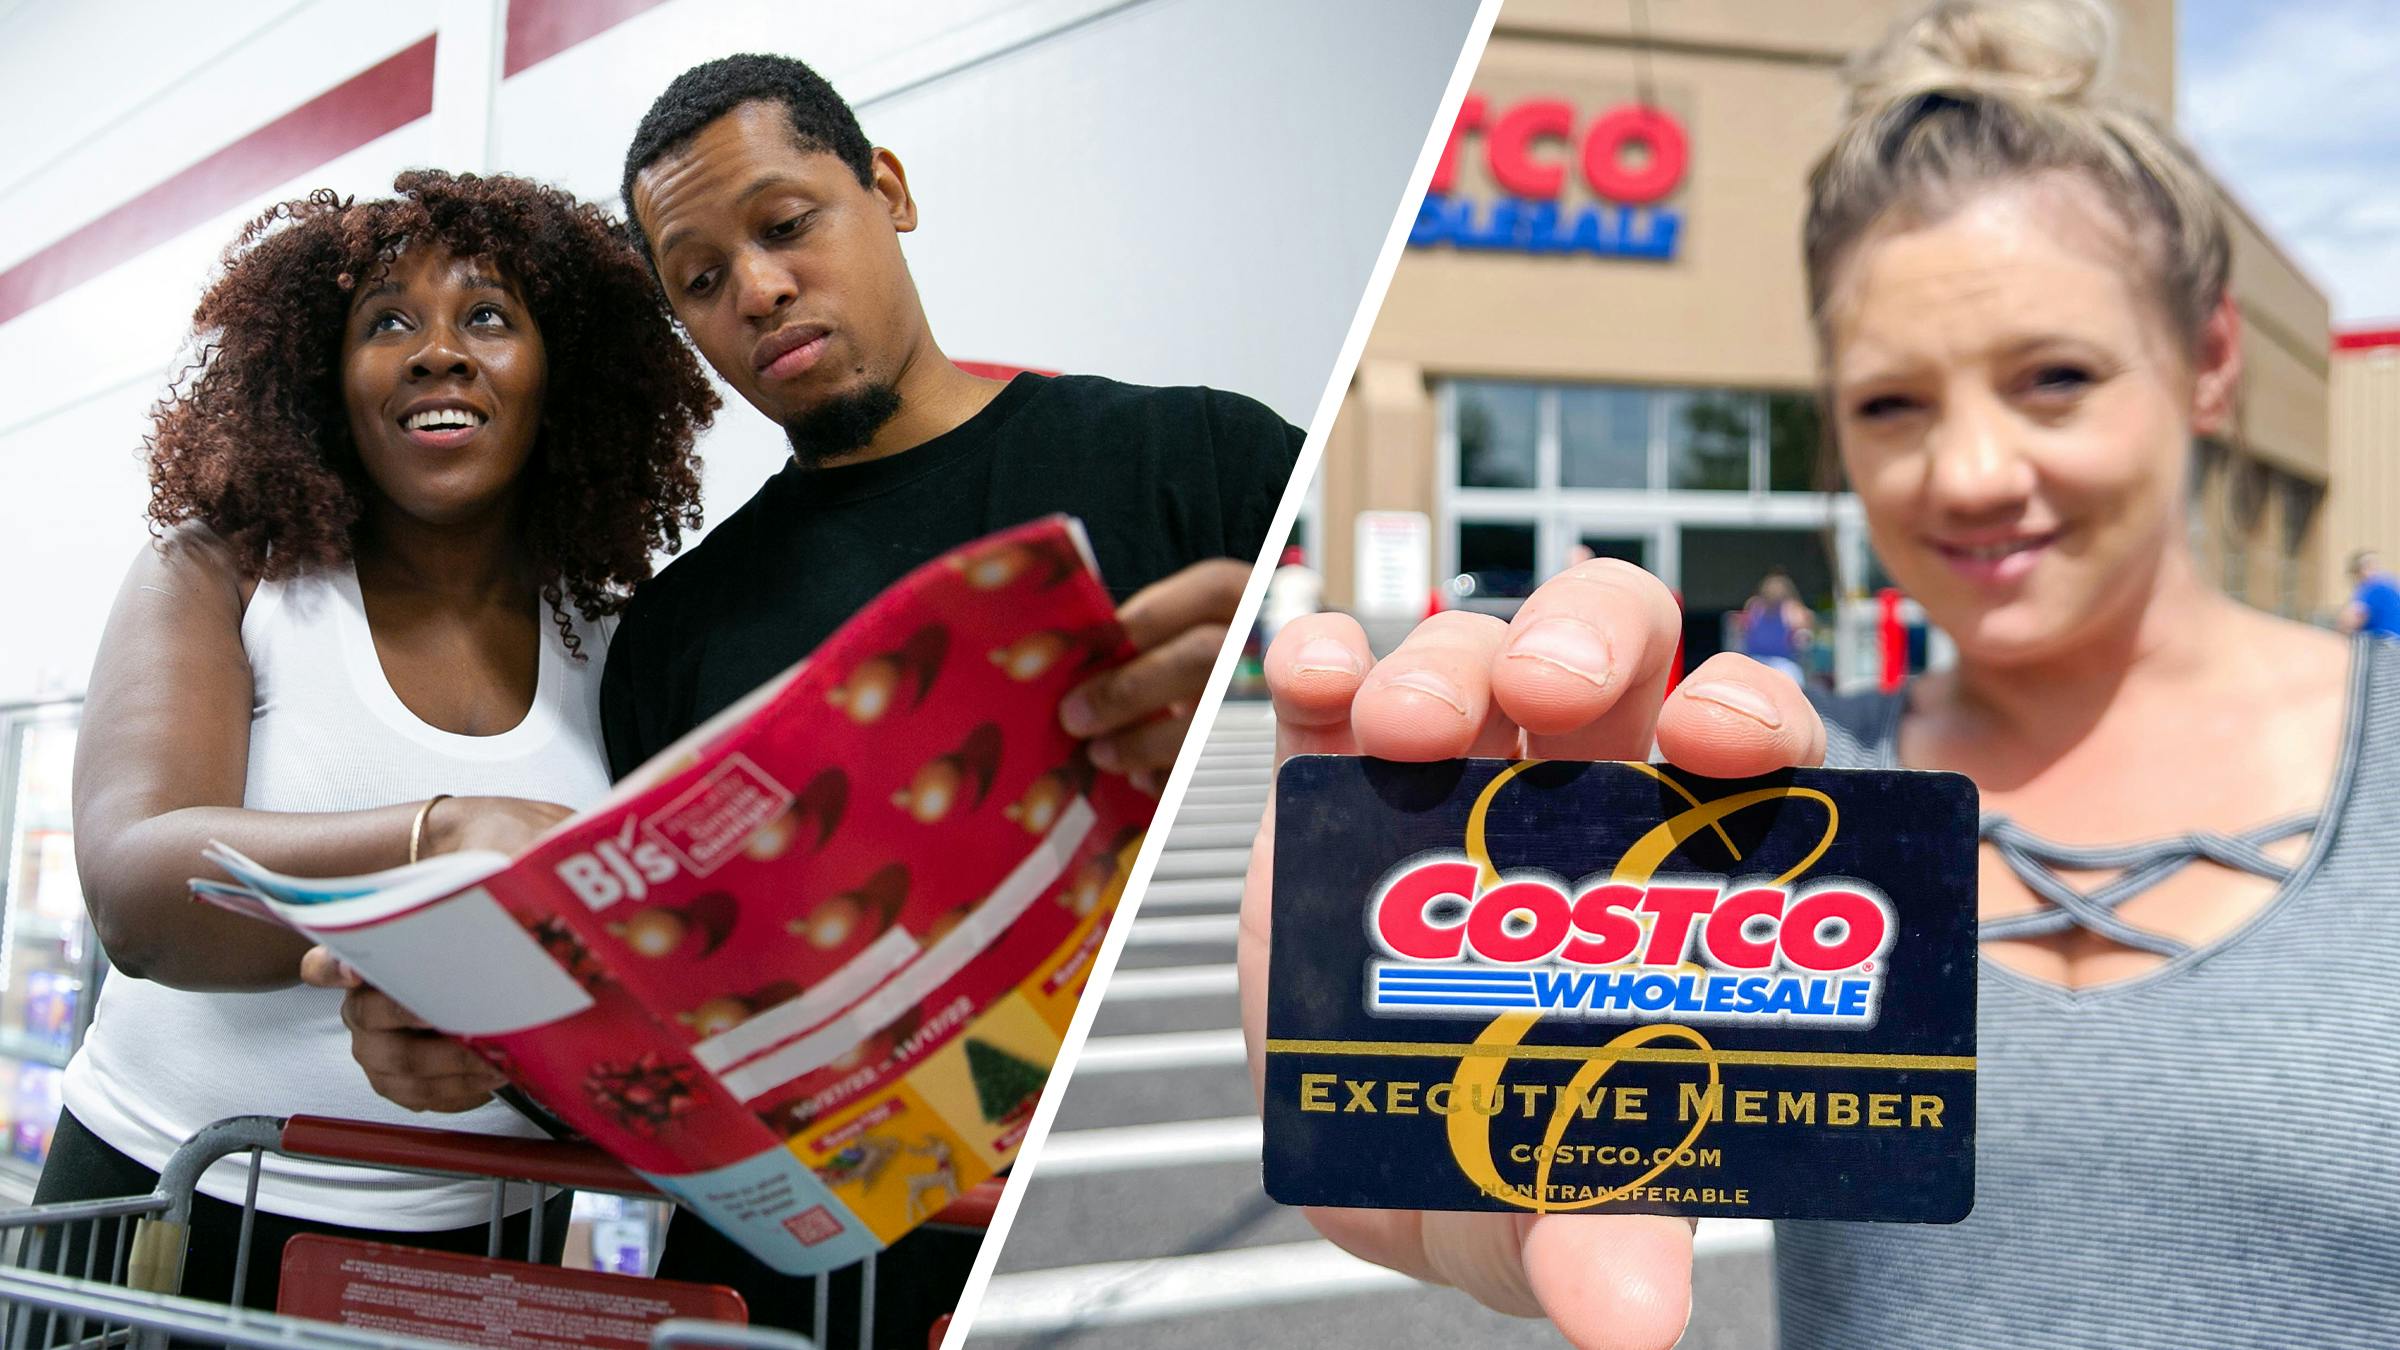 BJ's vs. Costco Here's How Their Fees, Perks & Store Brands Stack Up